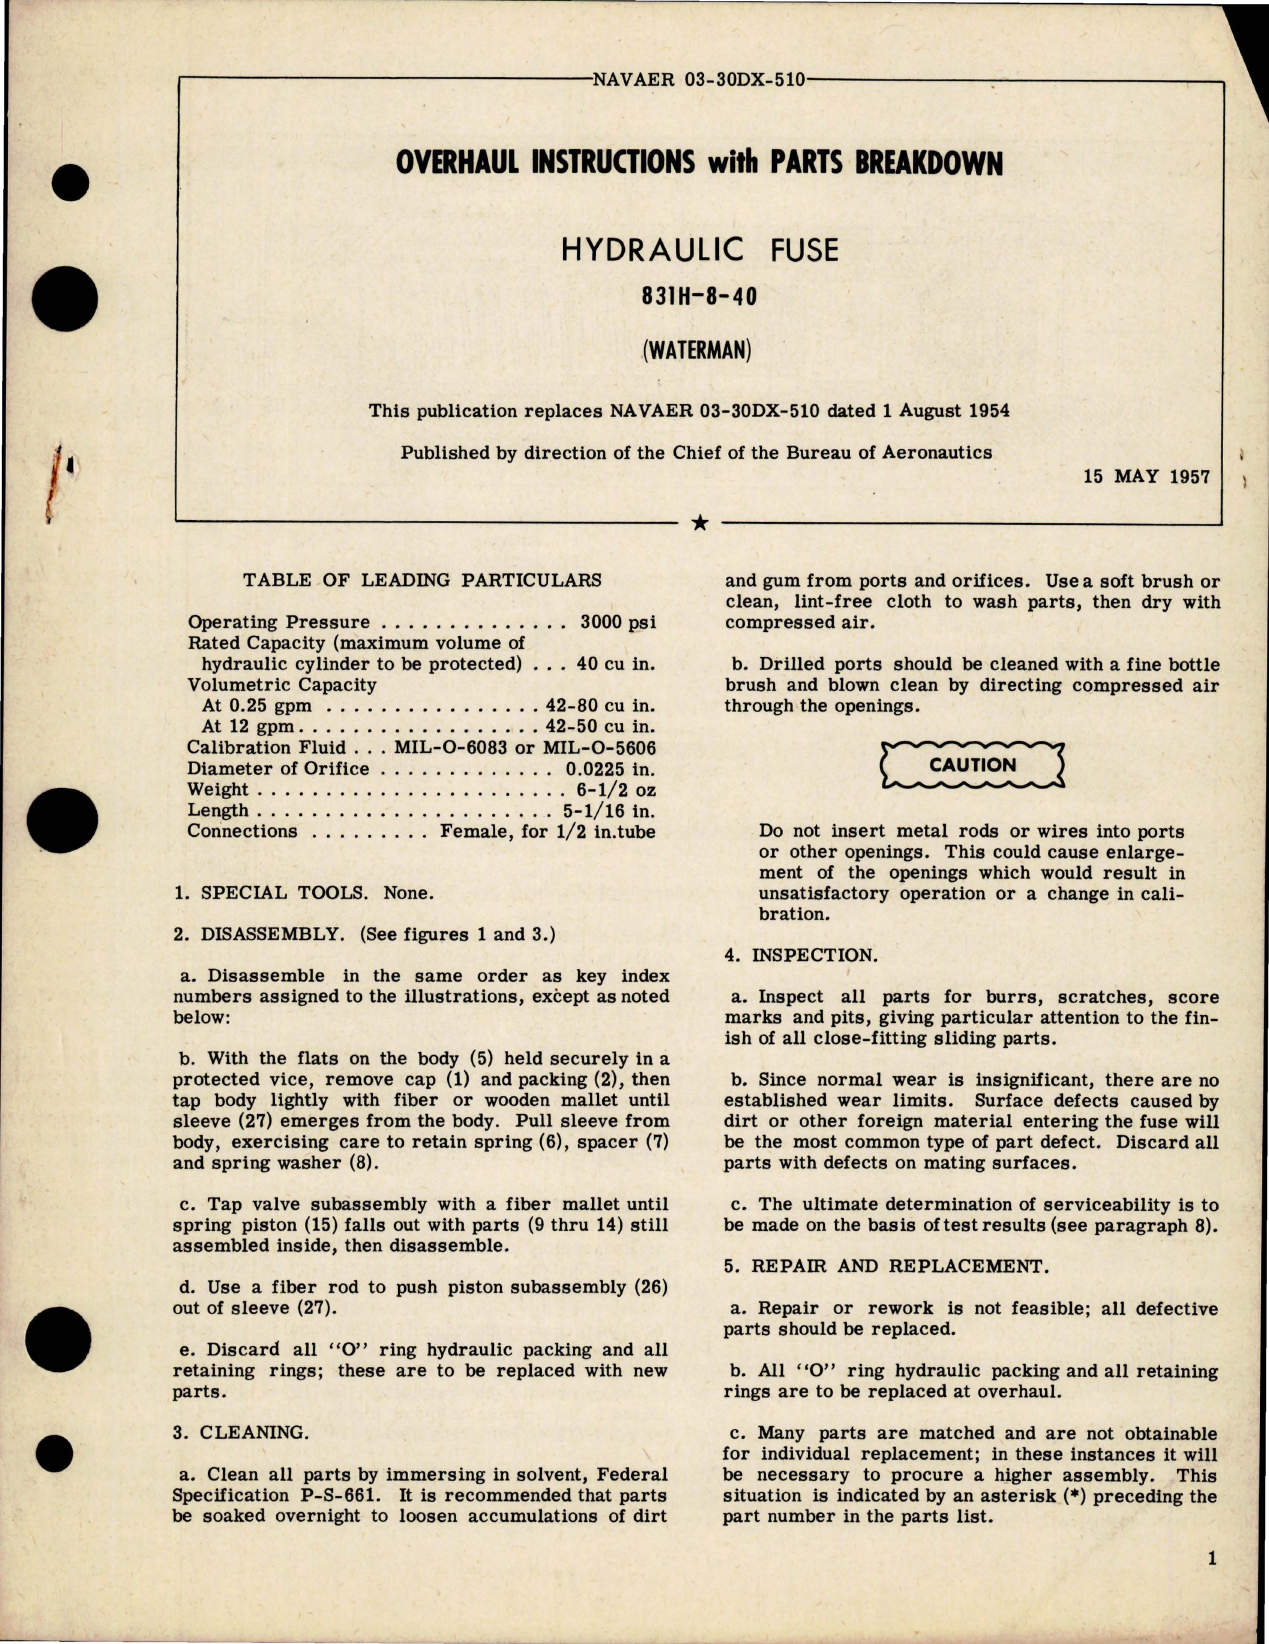 Sample page 1 from AirCorps Library document: Overhaul Instructions with Parts Breakdown for Hydraulic Fuse - 831H-8-40 